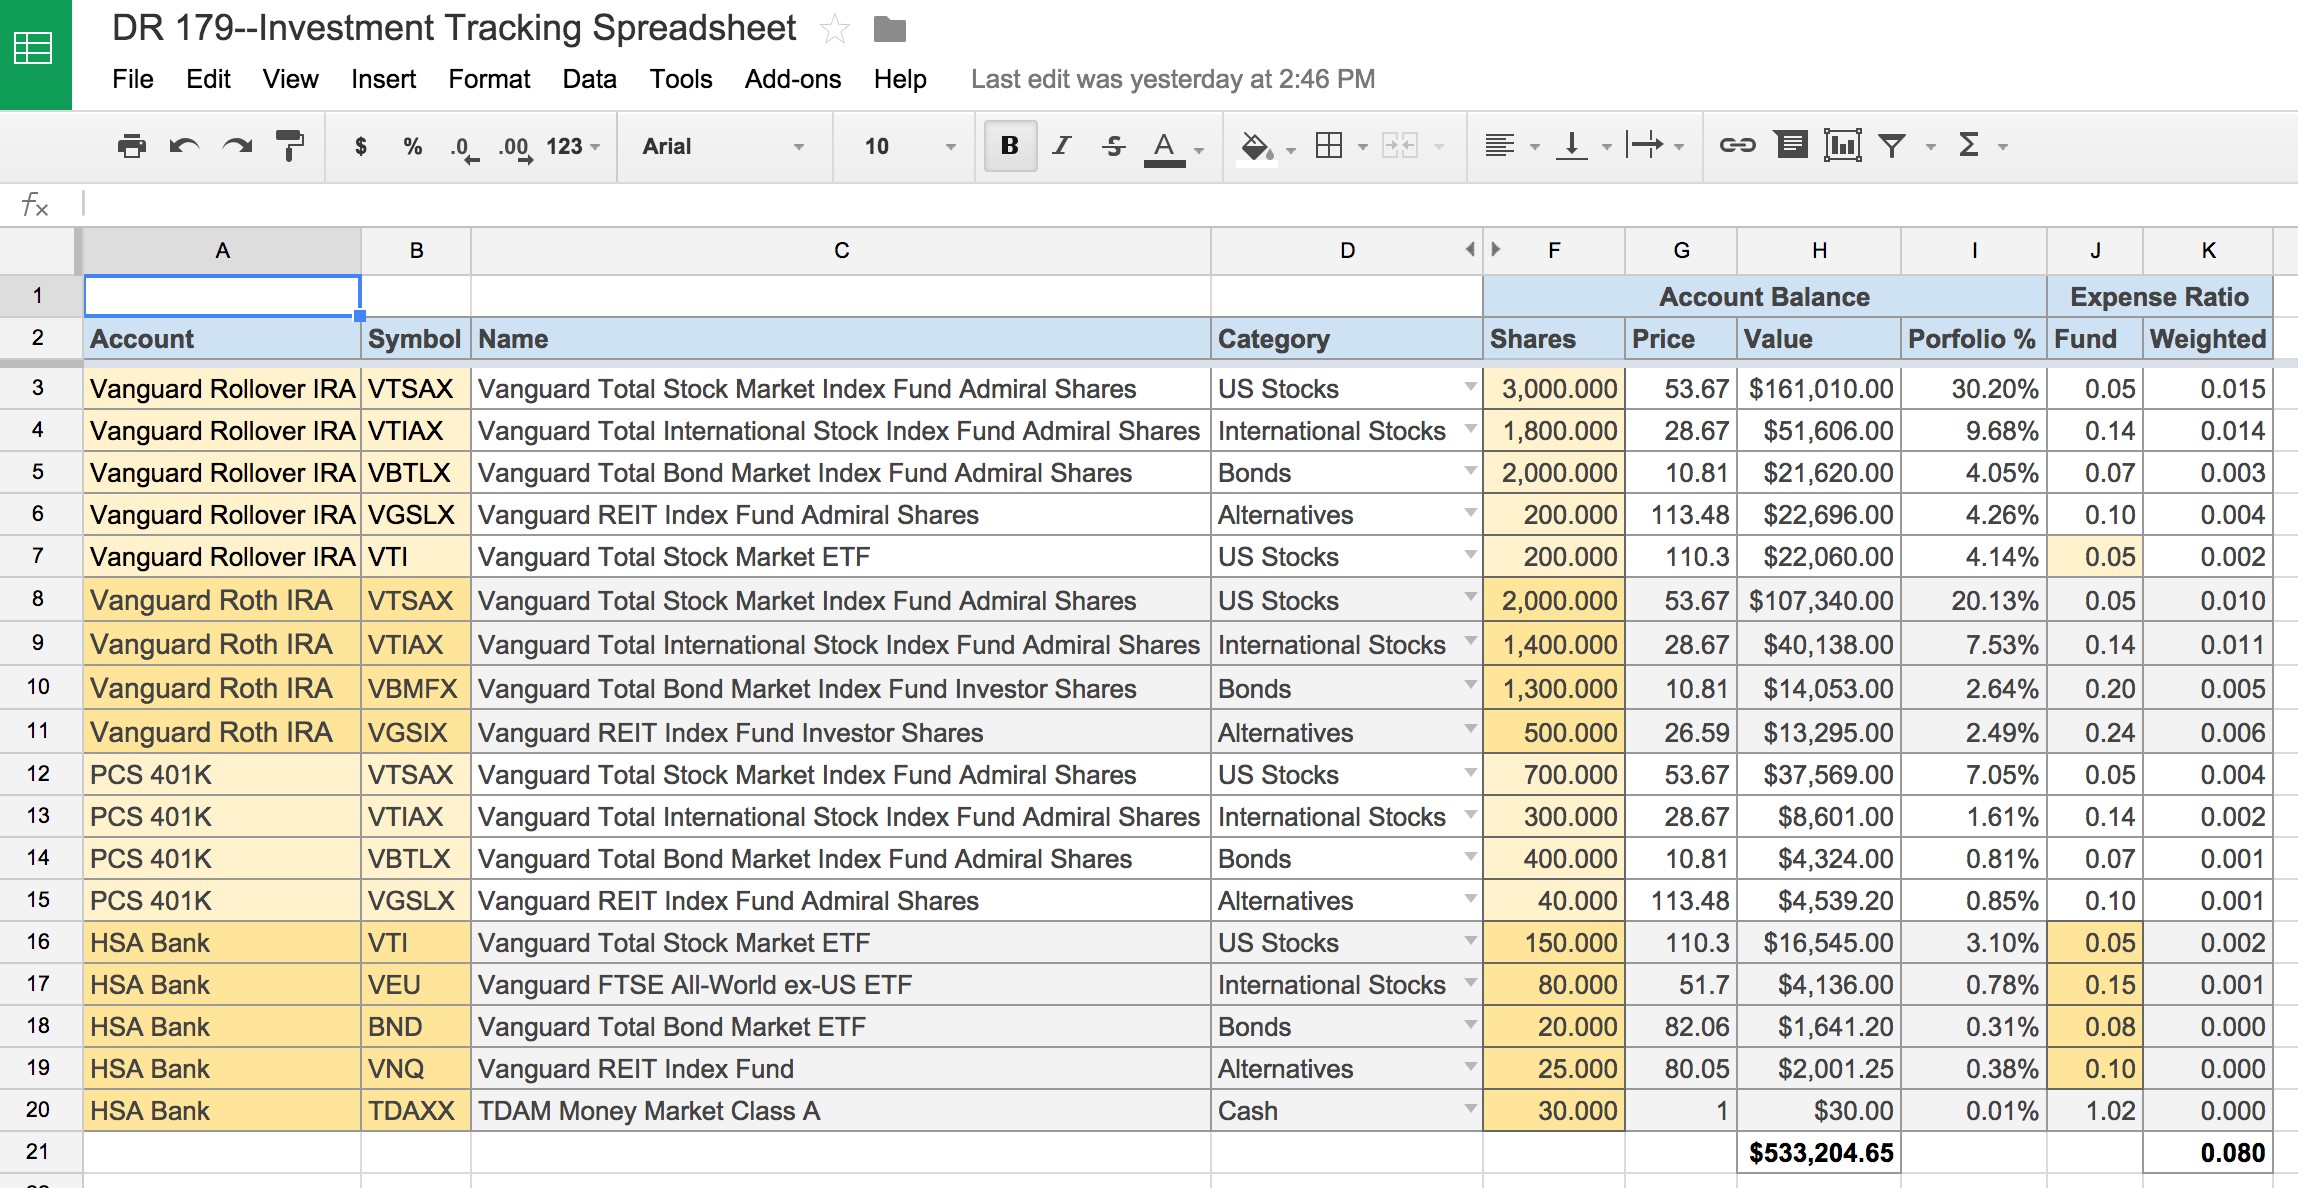 An Awesome And Free Investment Tracking Spreadsheet Document